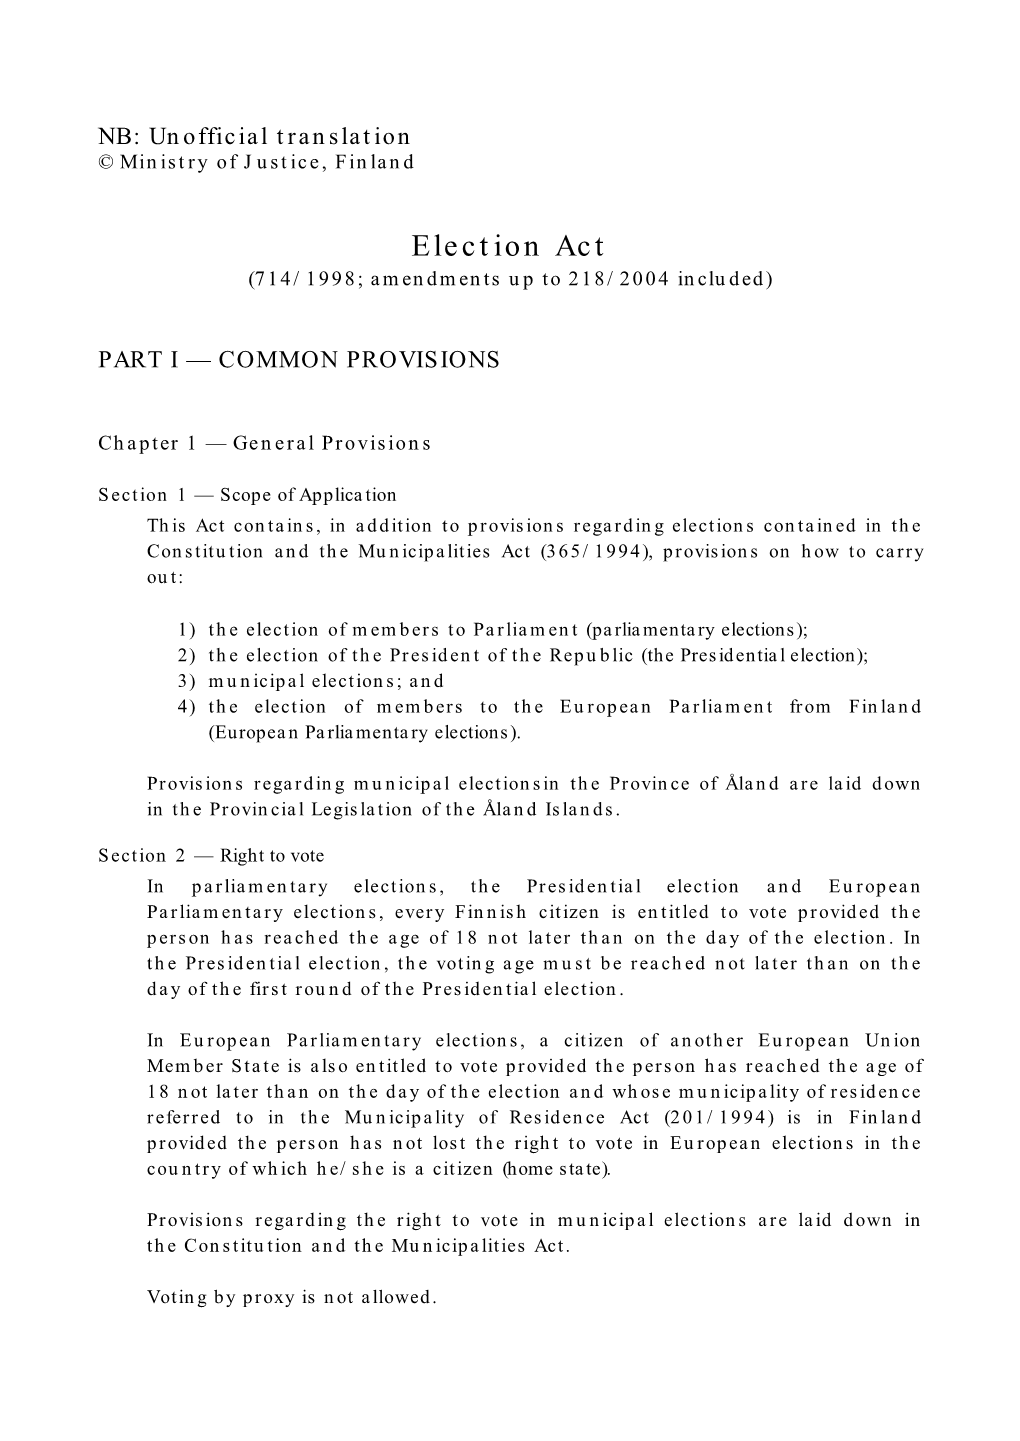 Election Act (714/1998; Amendments up to 218/2004 Included)